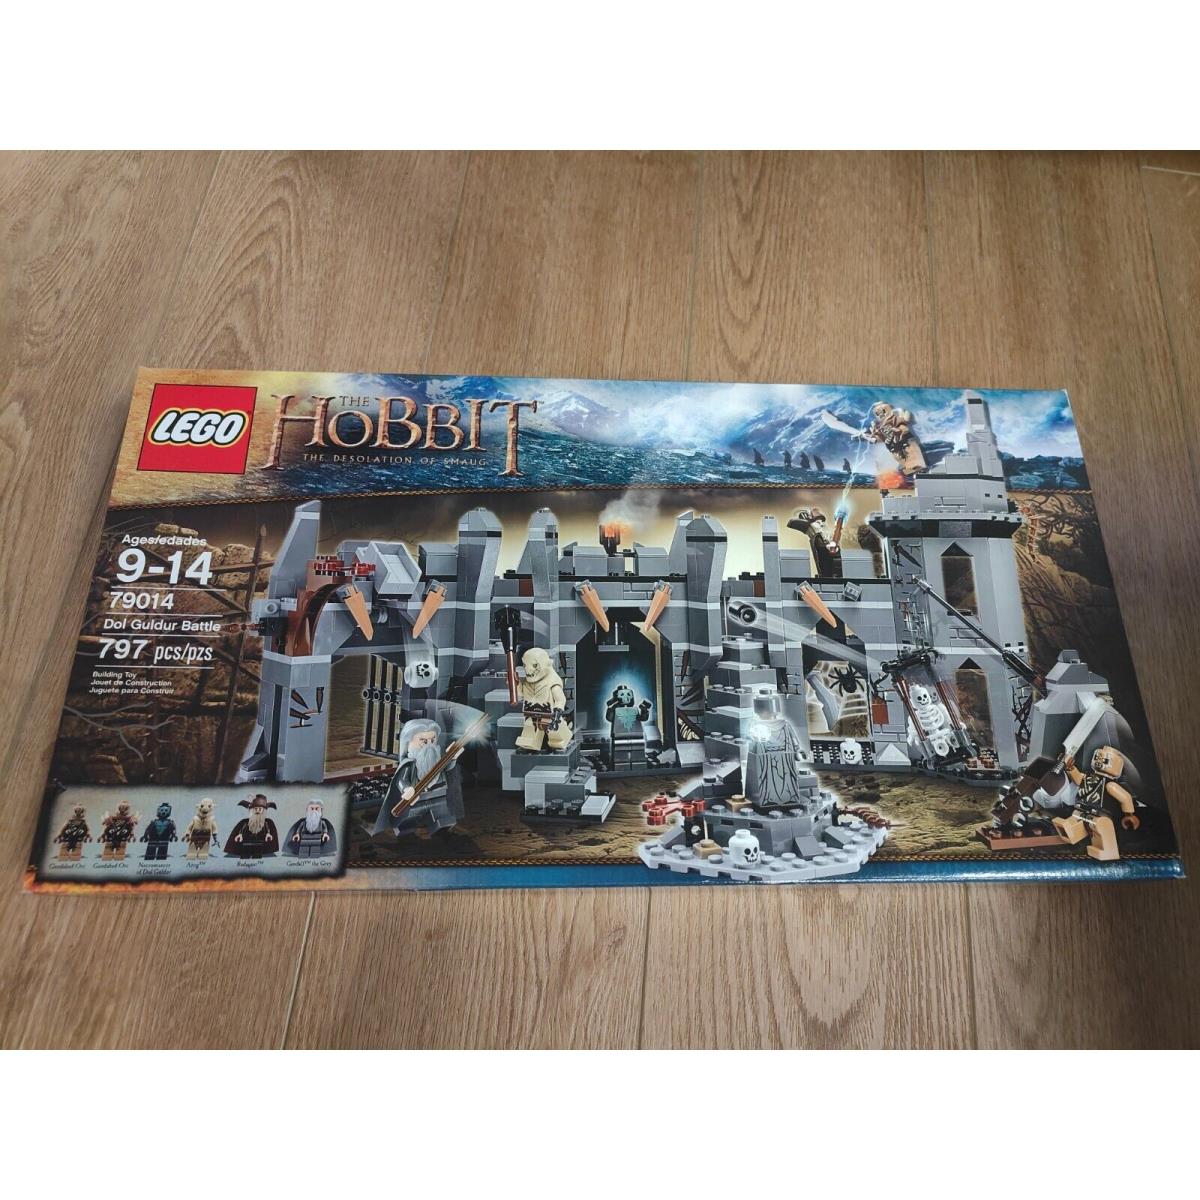 Lego The Lord of The Rings The Hobbit 79014 Dol Guldur Battle